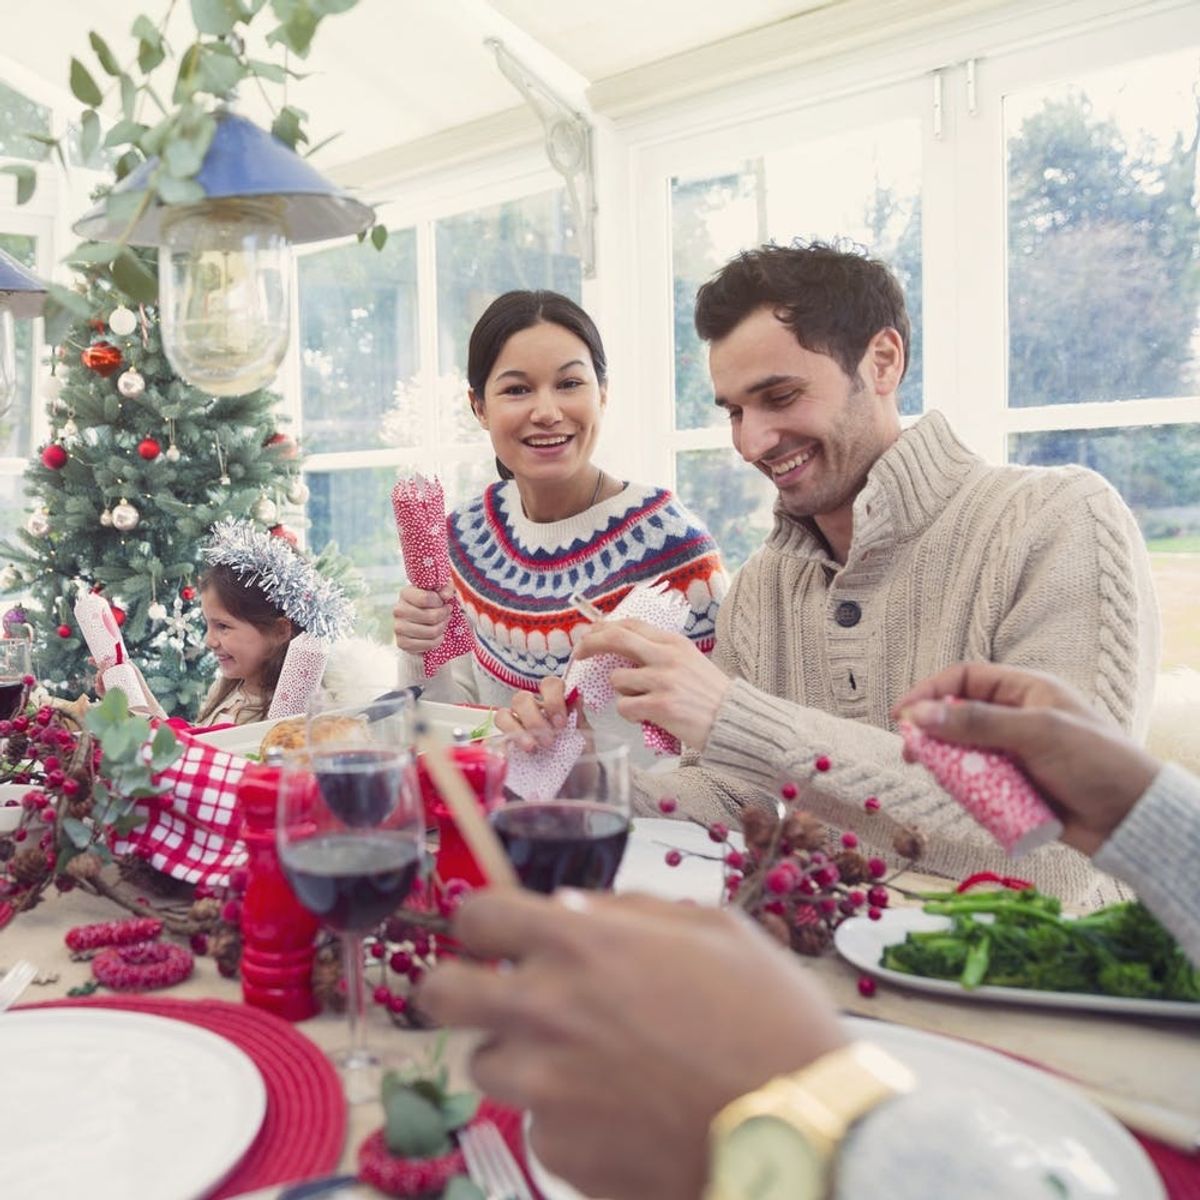 8 Helpful Tips for Visiting Other Families This Holiday Season